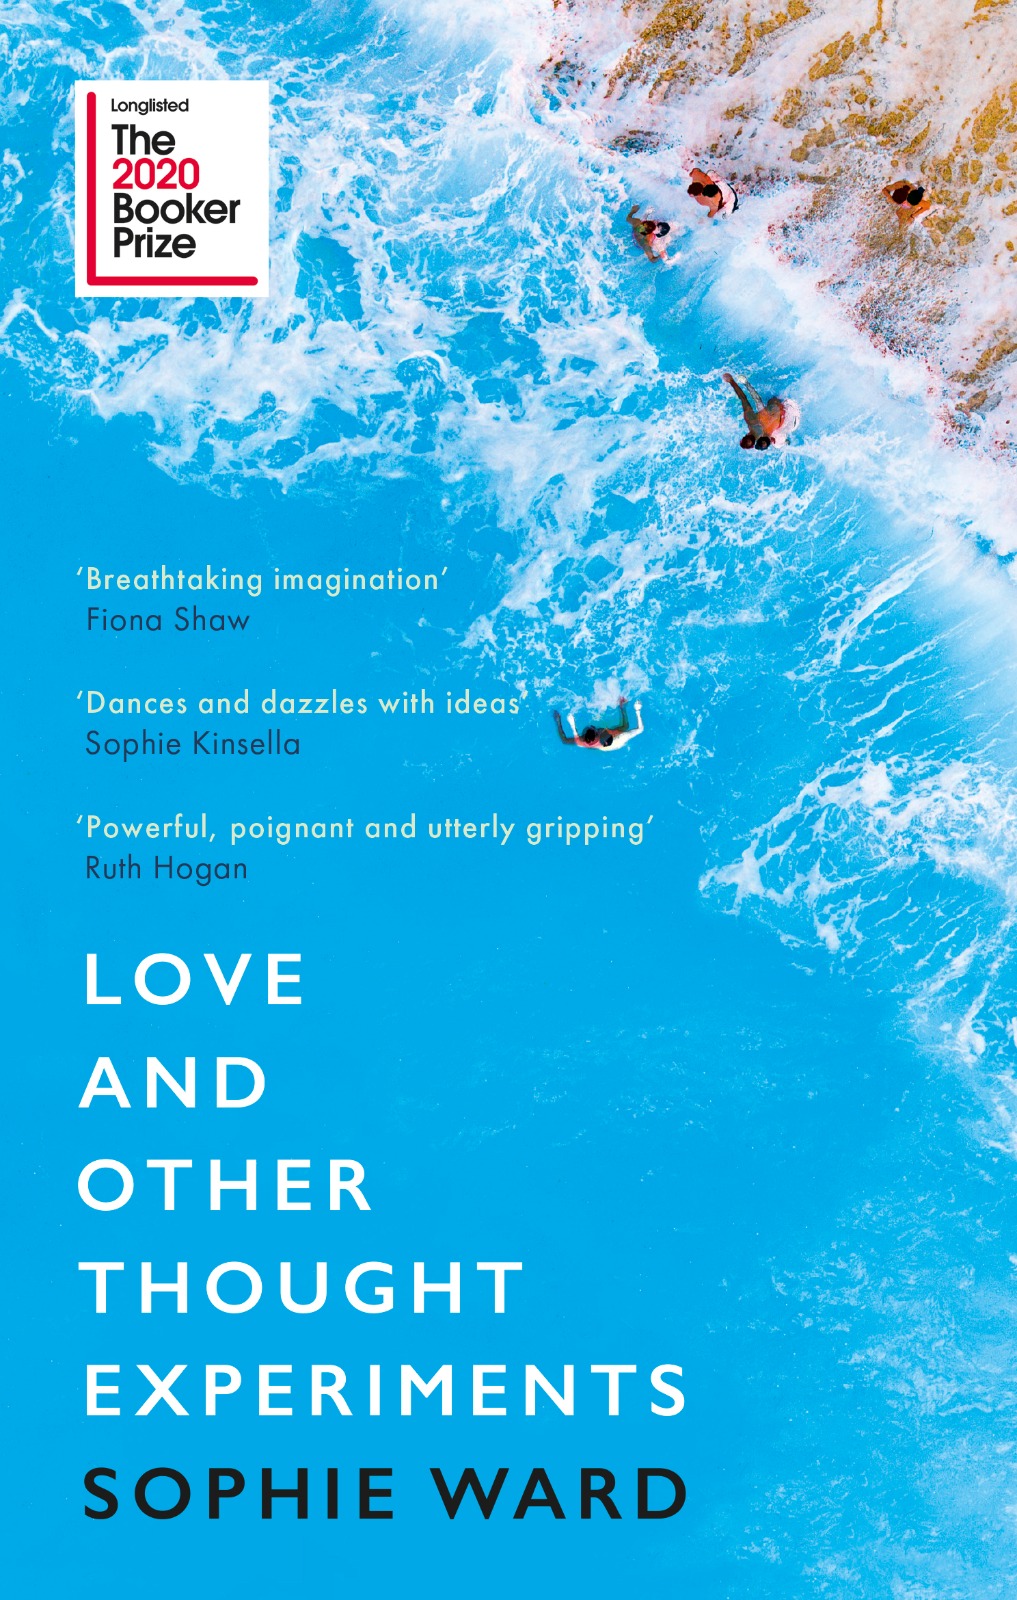 Love and Other Thought Experiments by Sophie Ward paperback book cover